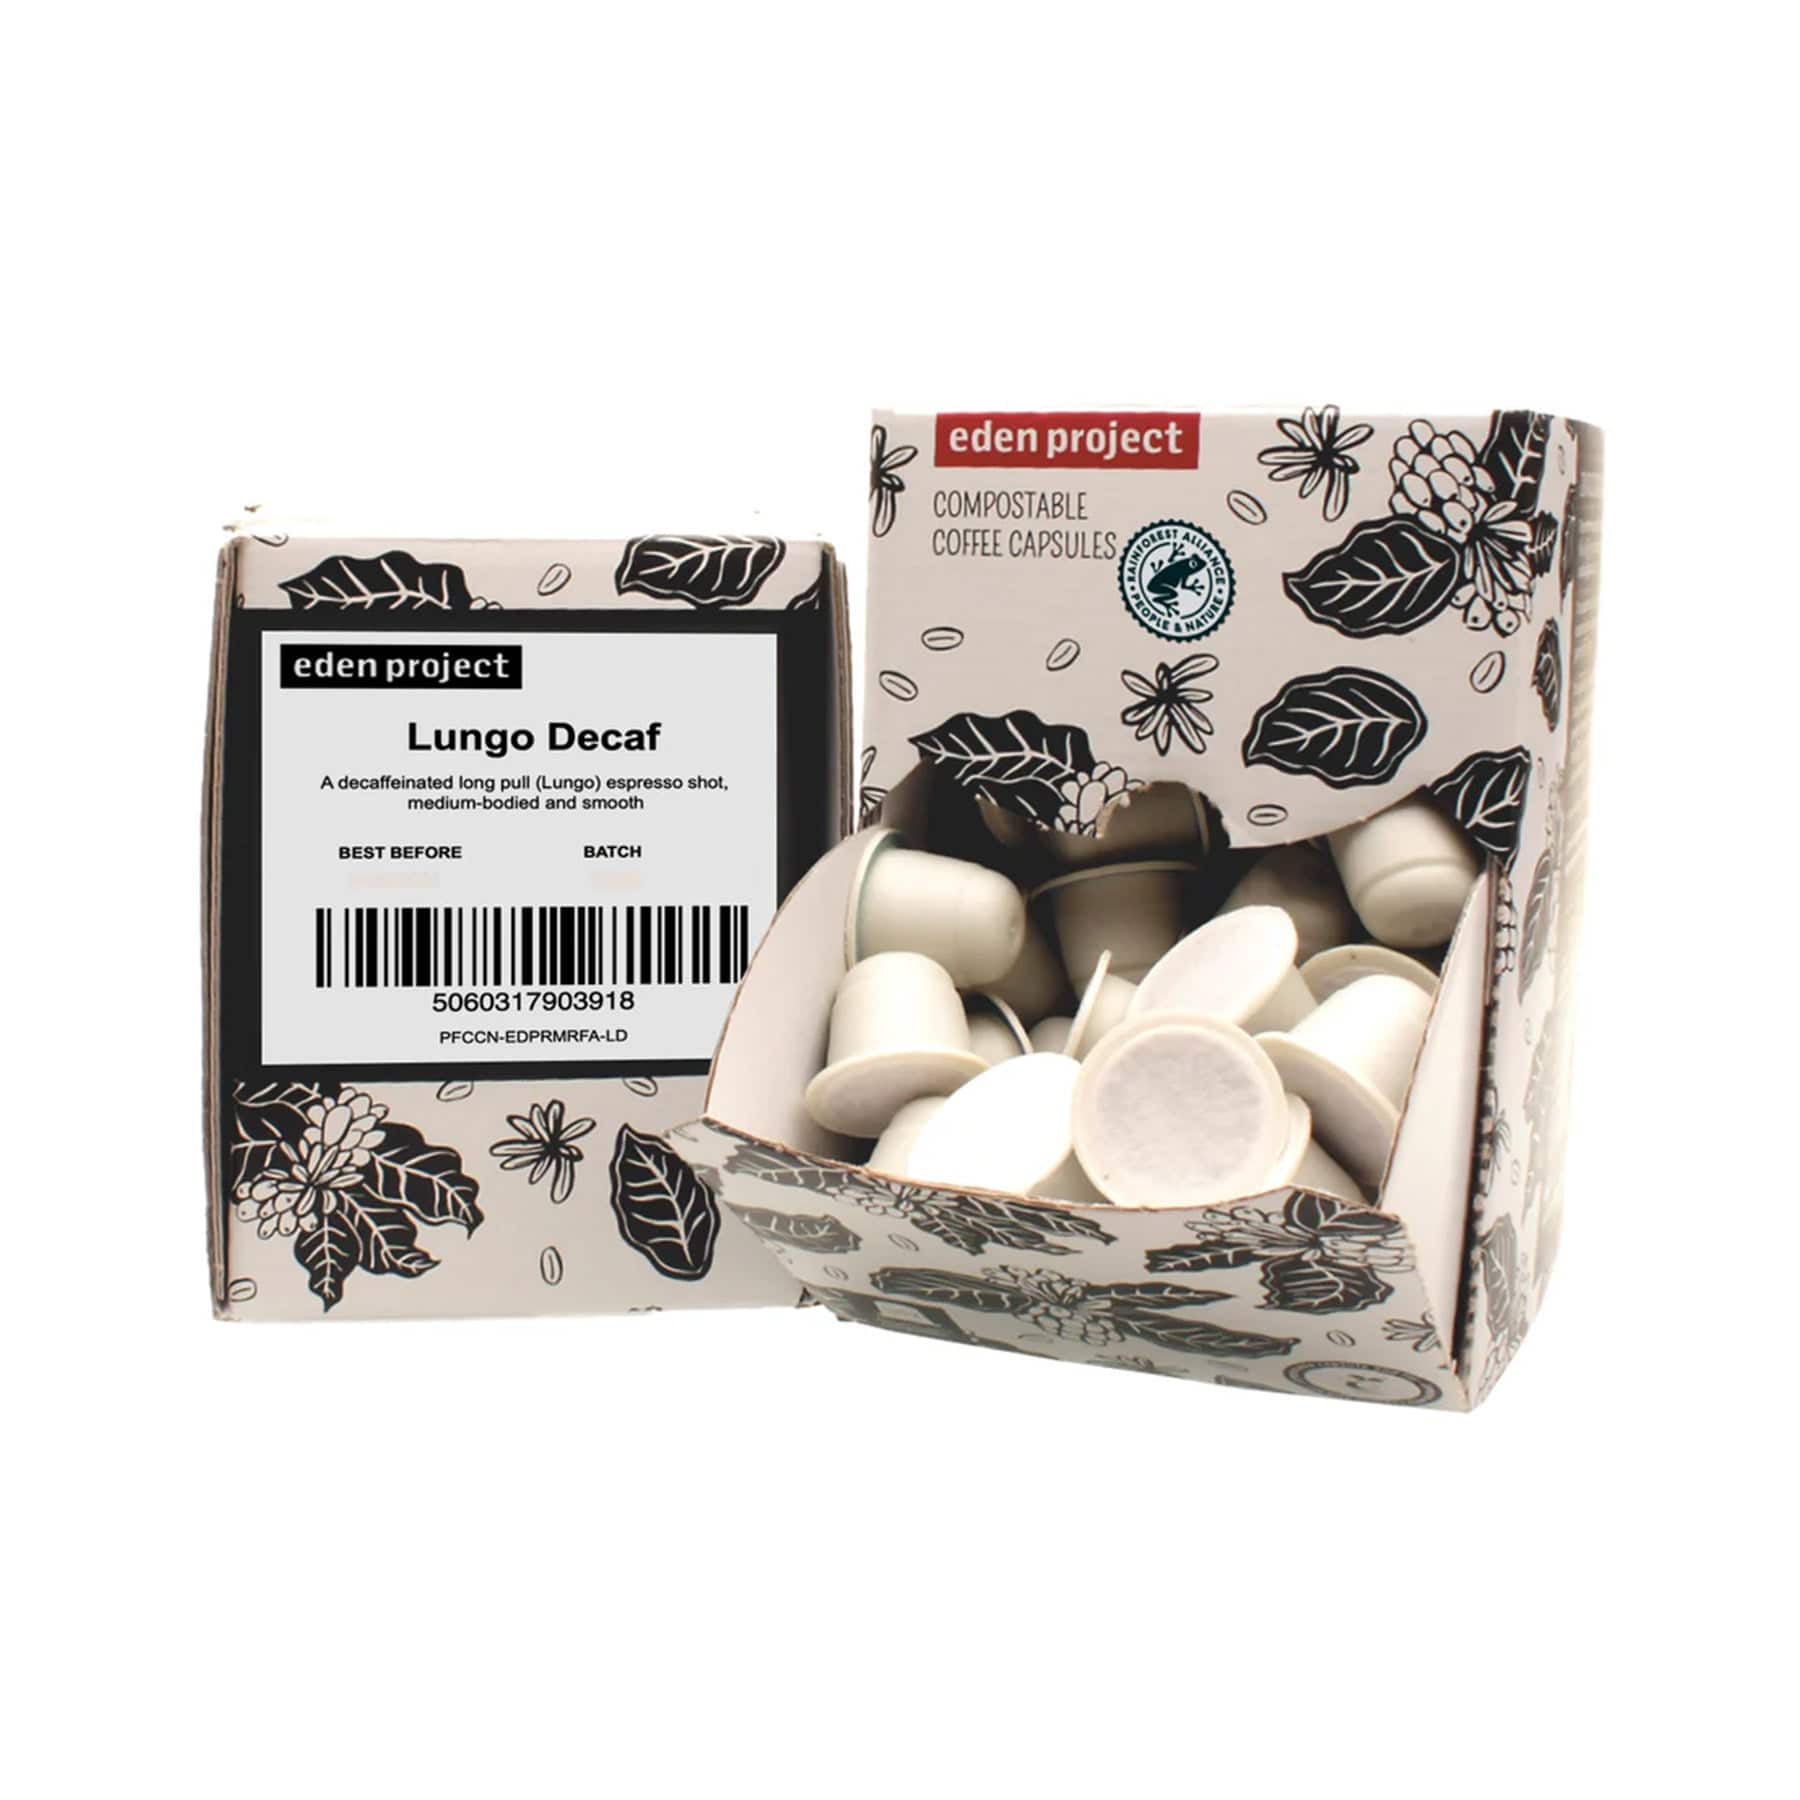 100 Lungo decaf biodegradable coffee capsules